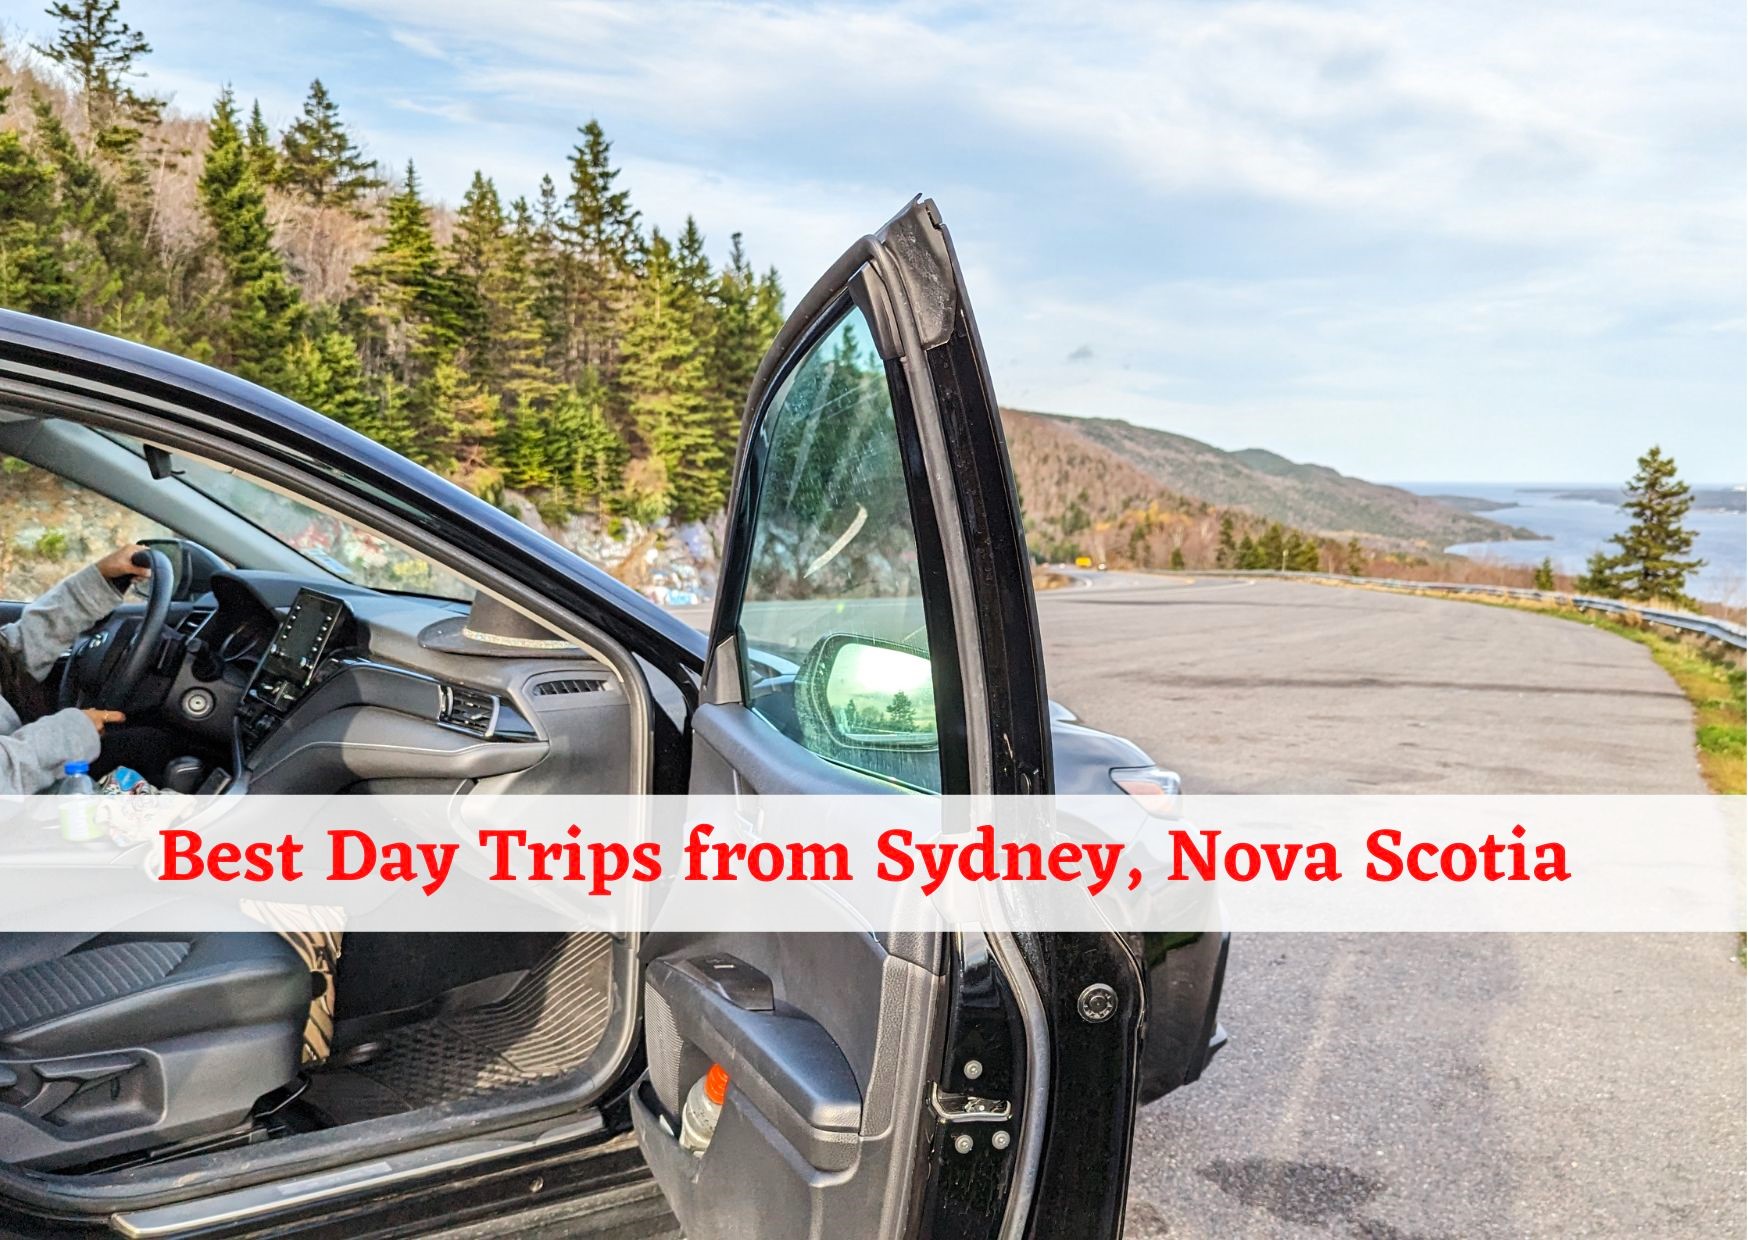 Day trips from Nova Scotiaa